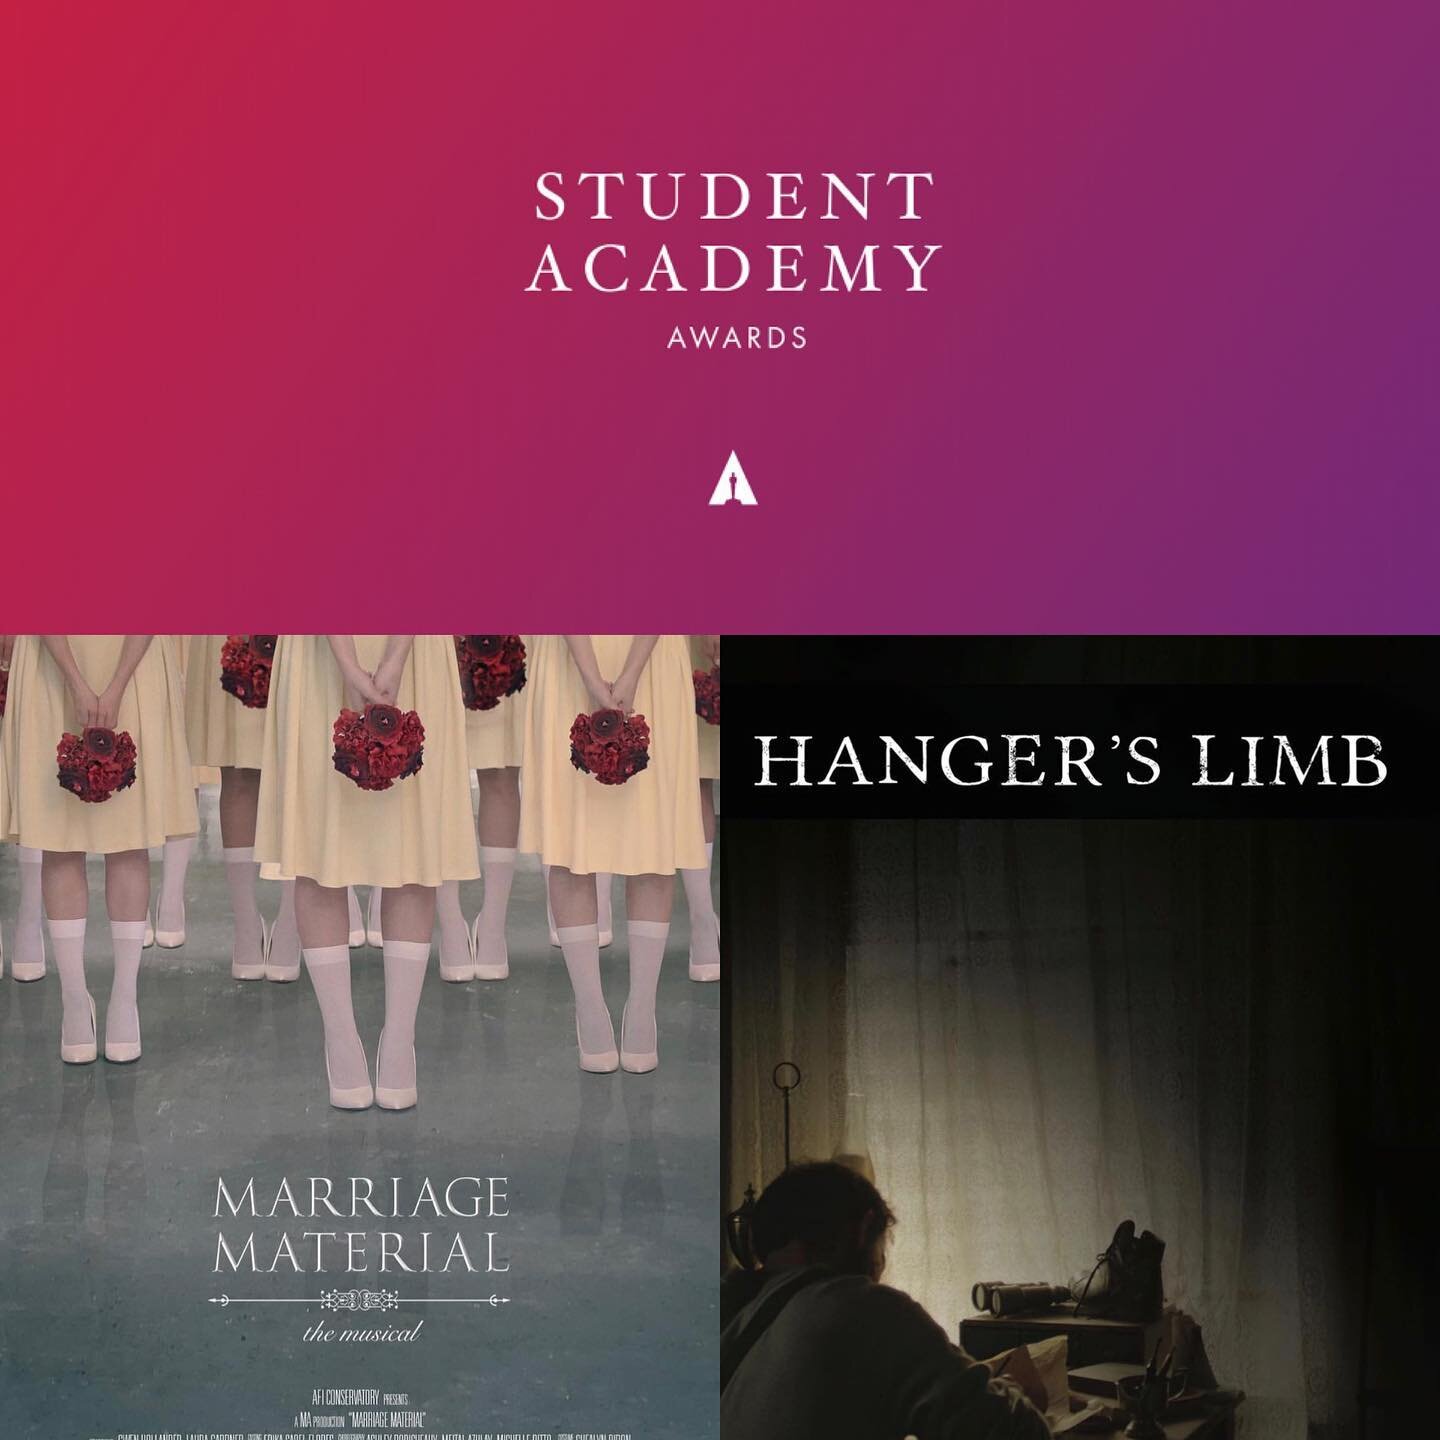 So excited to announce 2 student films I had the honor of costume designing had been selected for the semi-finals of the student academy awards! @theacademy Both are very important stories in their own right and I&rsquo;m so grateful to have worked o